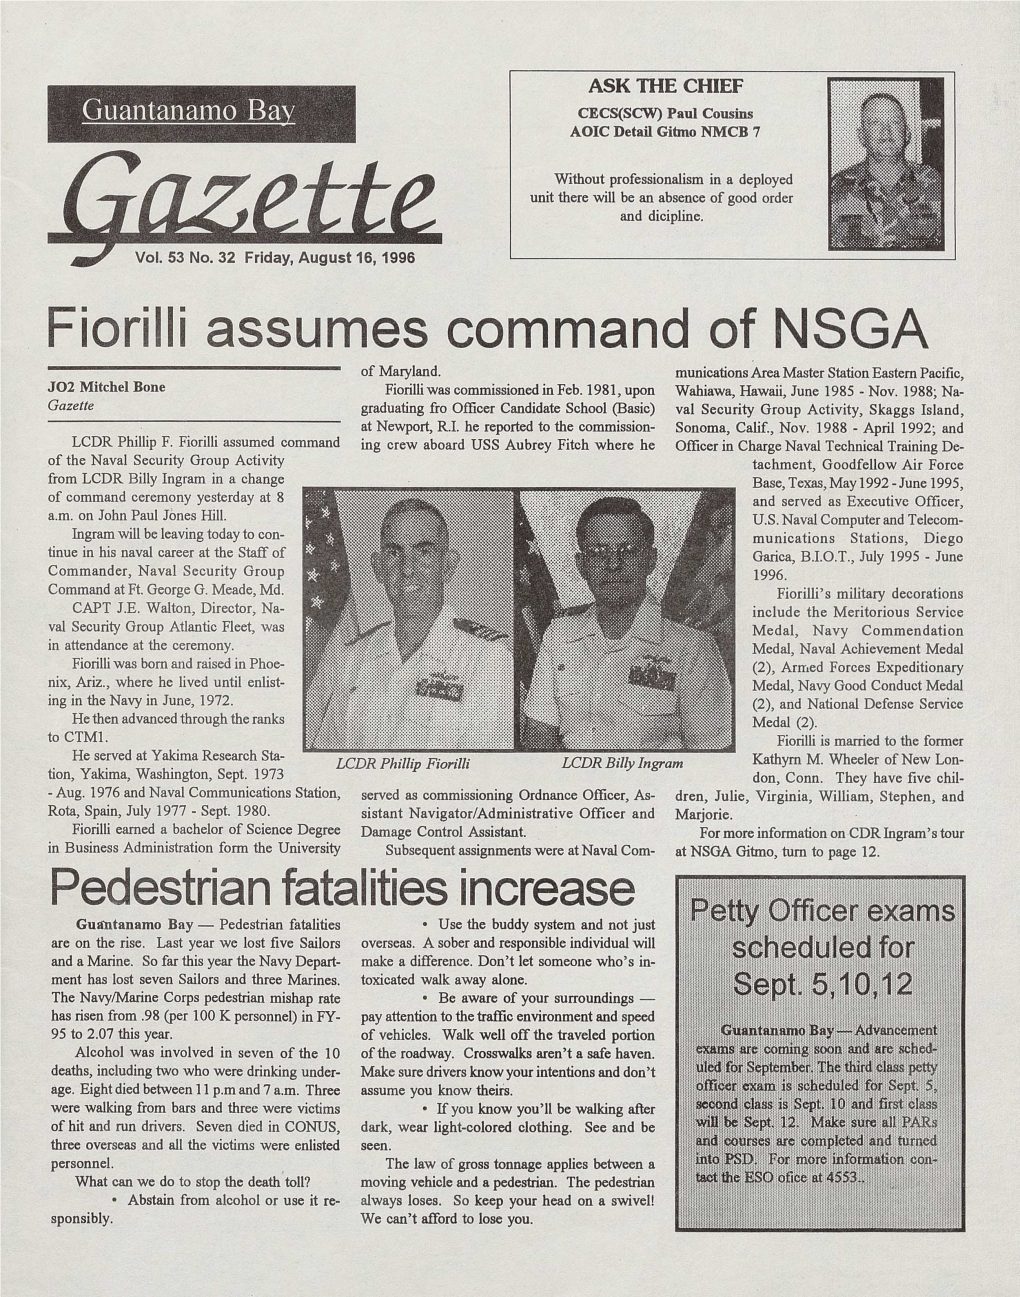 Fiorilli Assumes Command of NSGA of Maryland